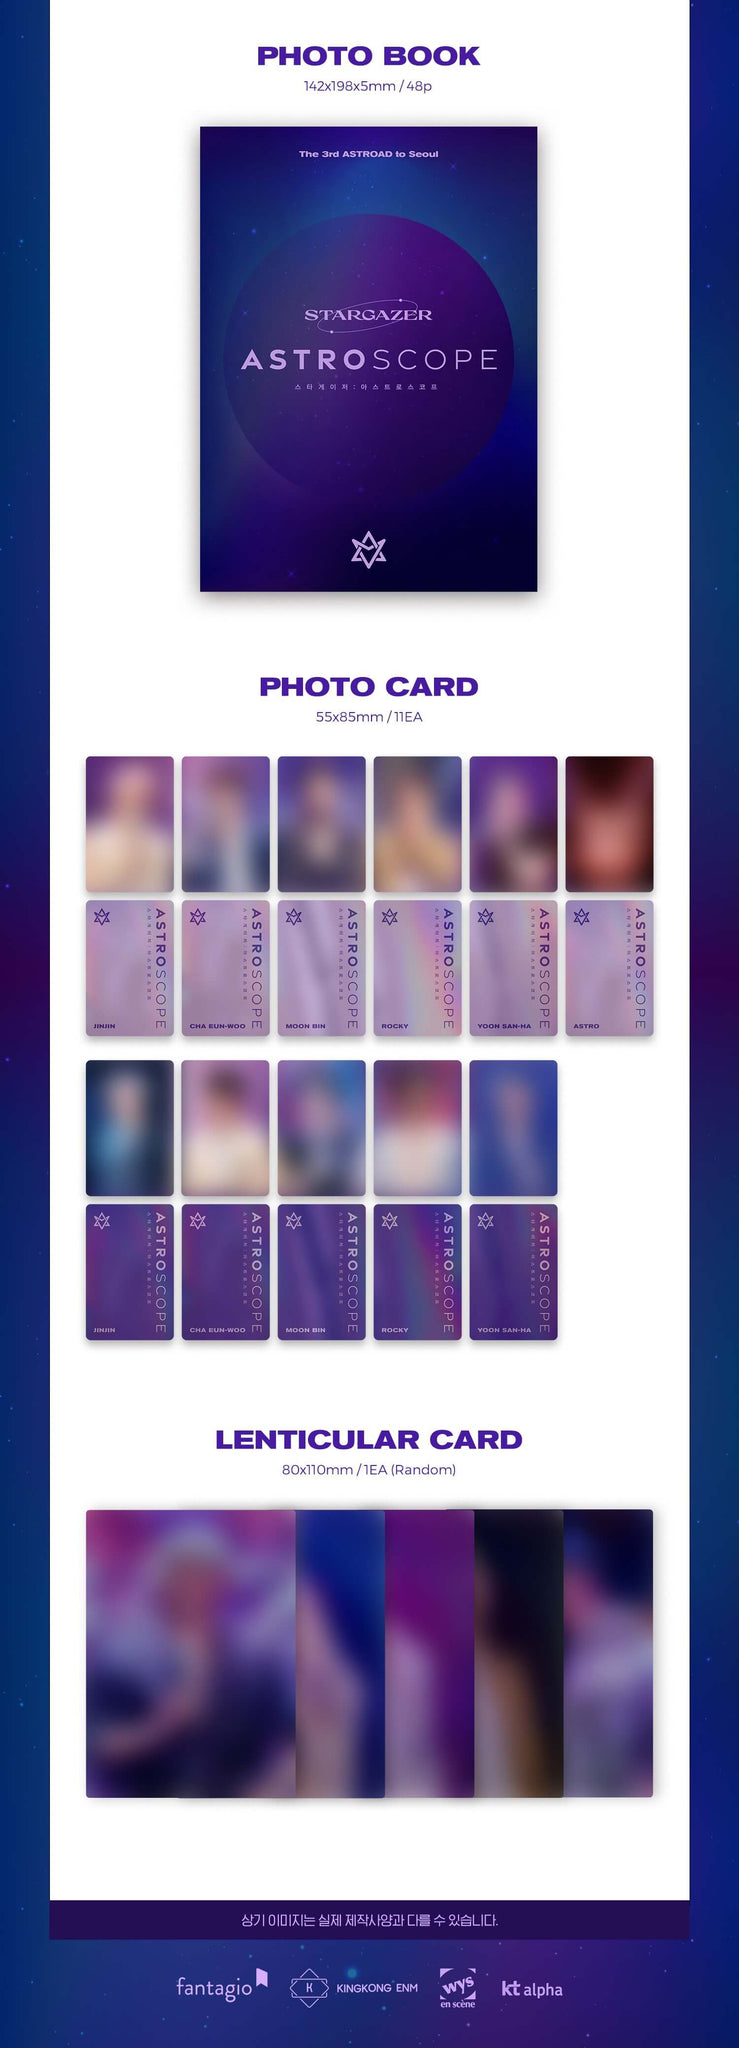 ASTRO - The 3rd ASTROAD to Seoul STARGAZER DVD Inclusions Photobook Photocards Lenticular Card